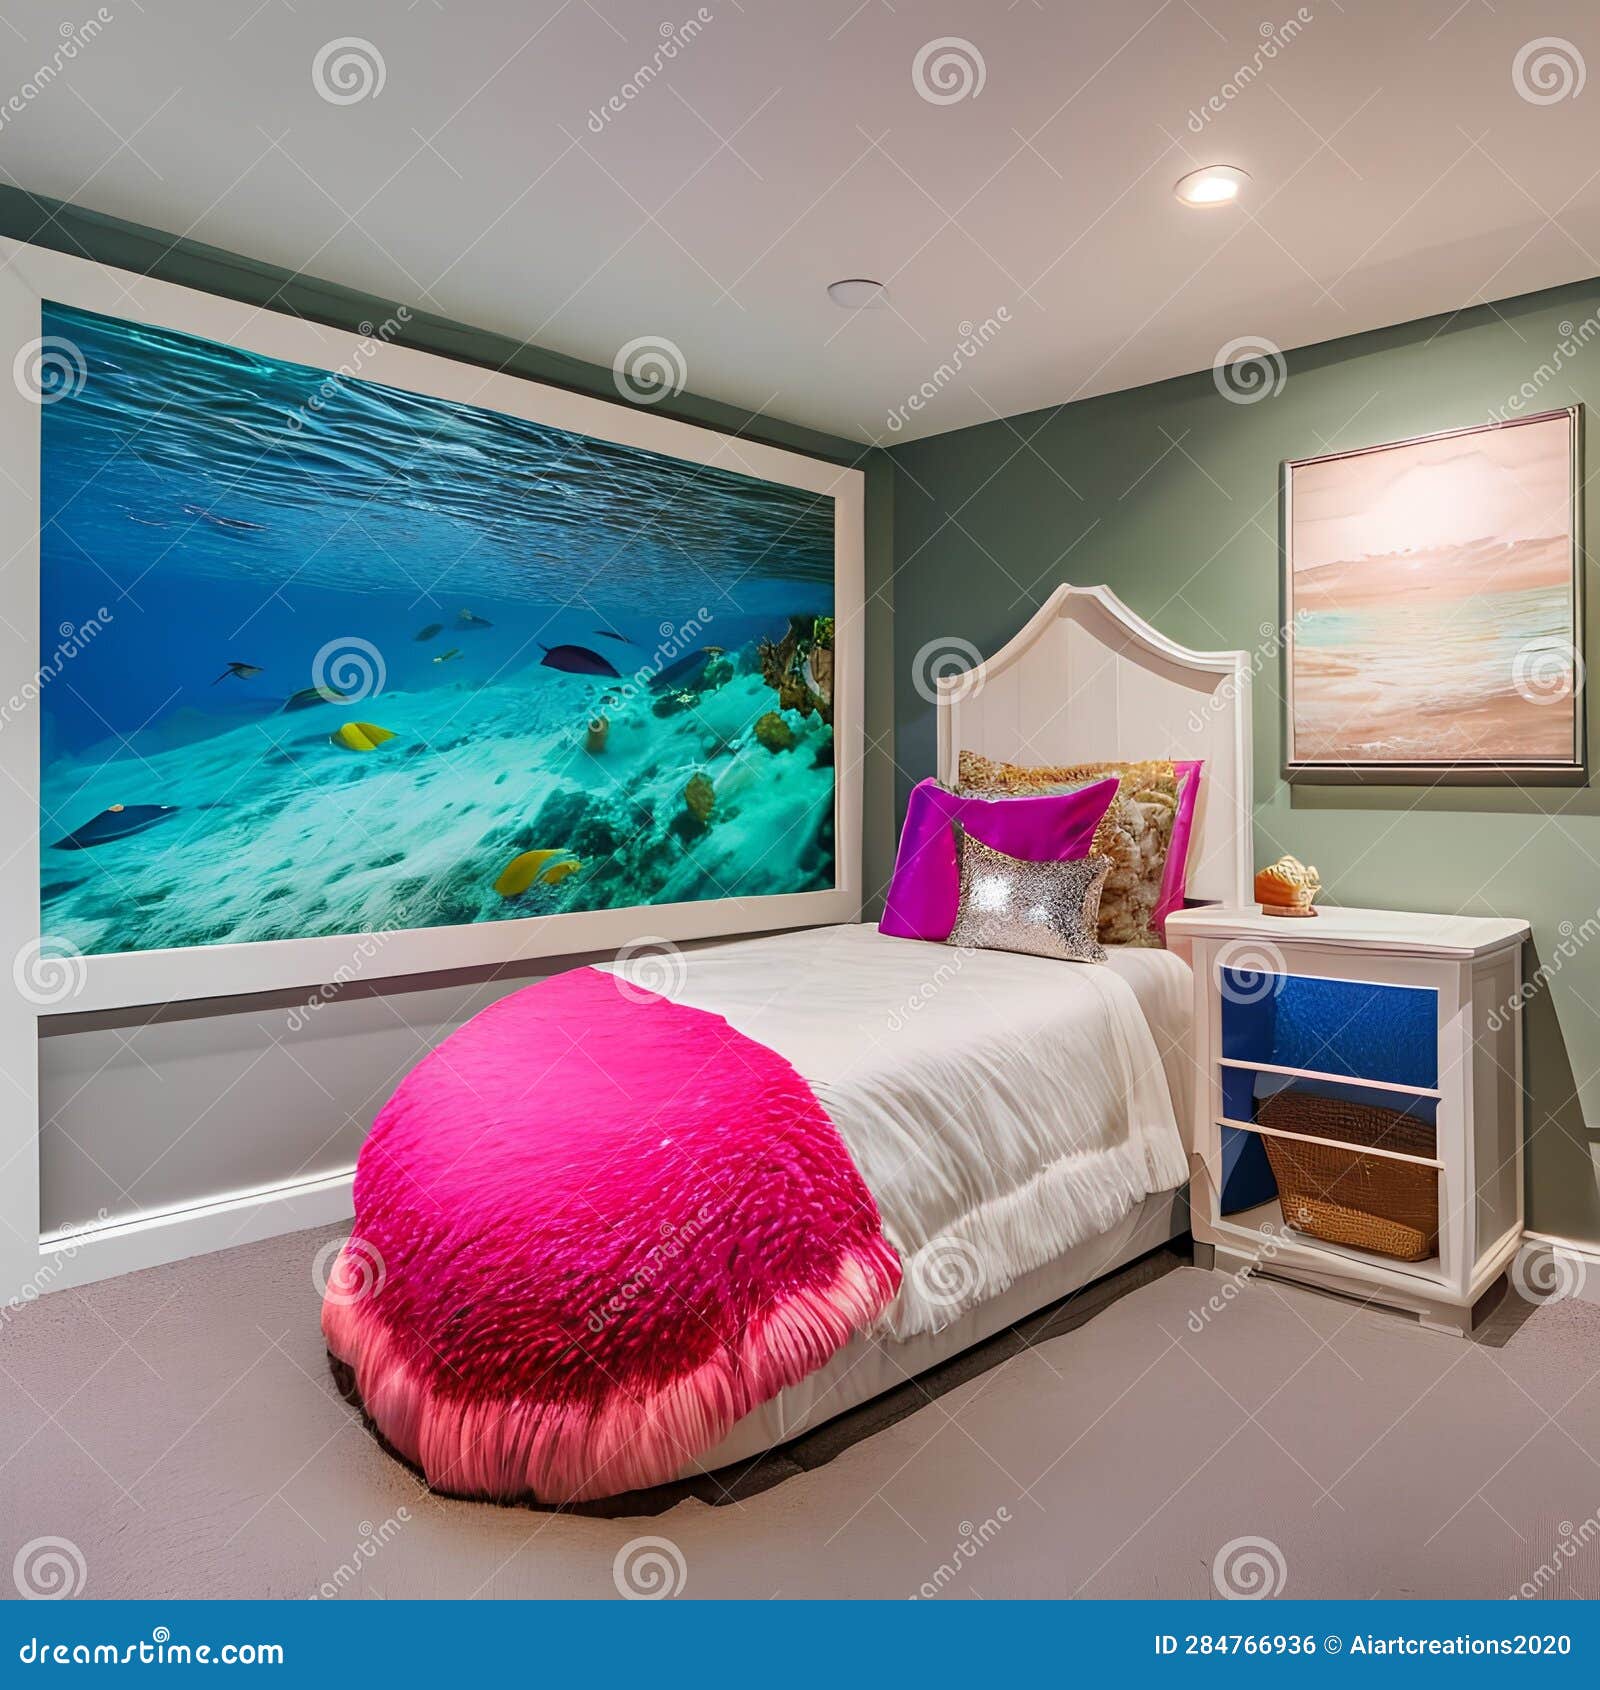 An Underwater Mermaid-themed Bedroom with Seashell-shaped Bed